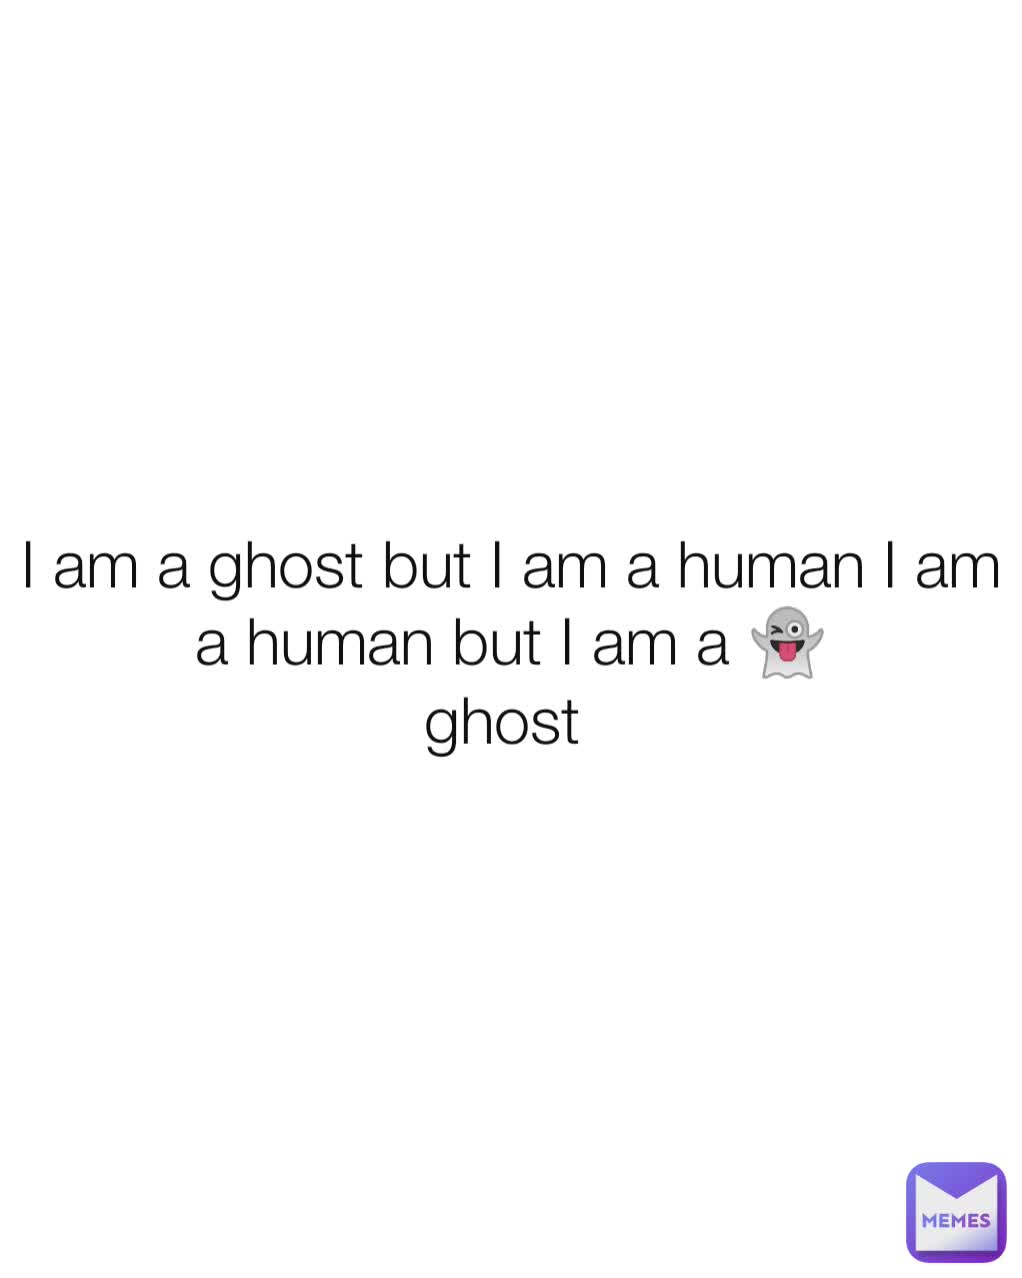 I am a ghost but I am a human I am a human but I am a 👻
ghost 